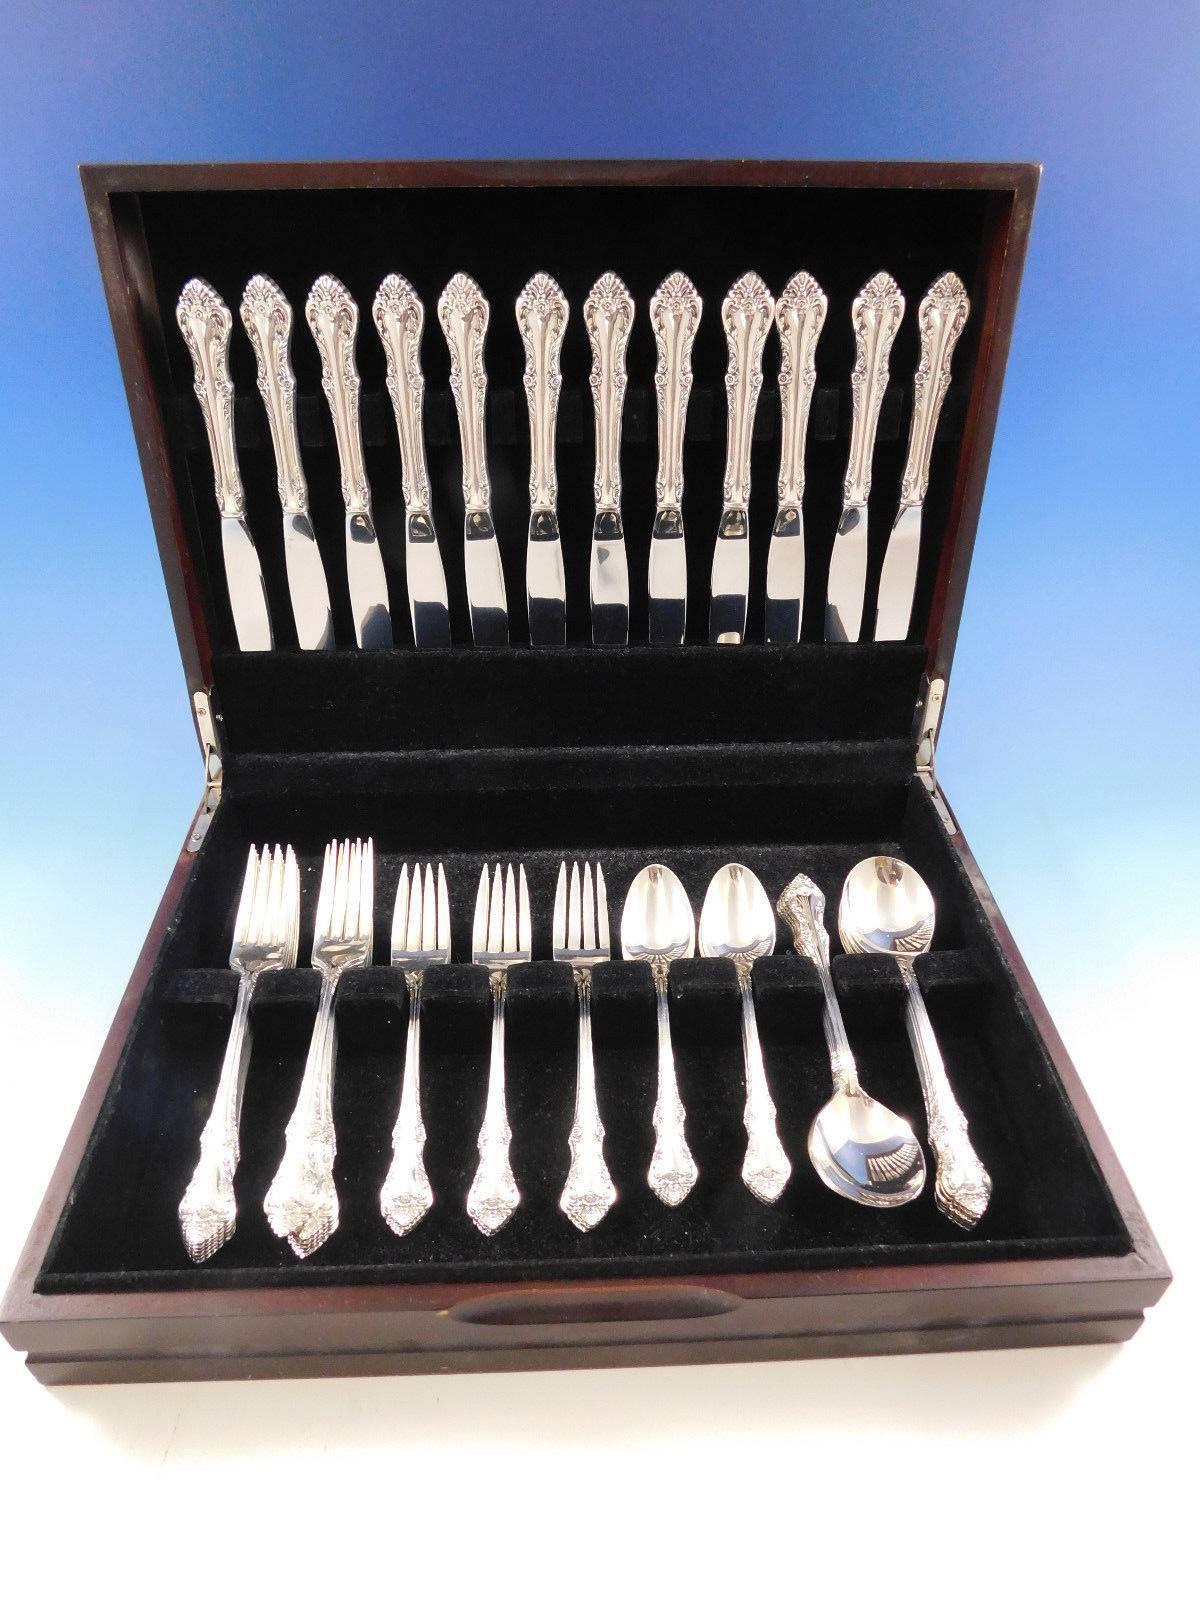 Melbourne by Oneida sterling silver flatware set, 60 pieces. This set includes: 

12 knives, 8 7/8